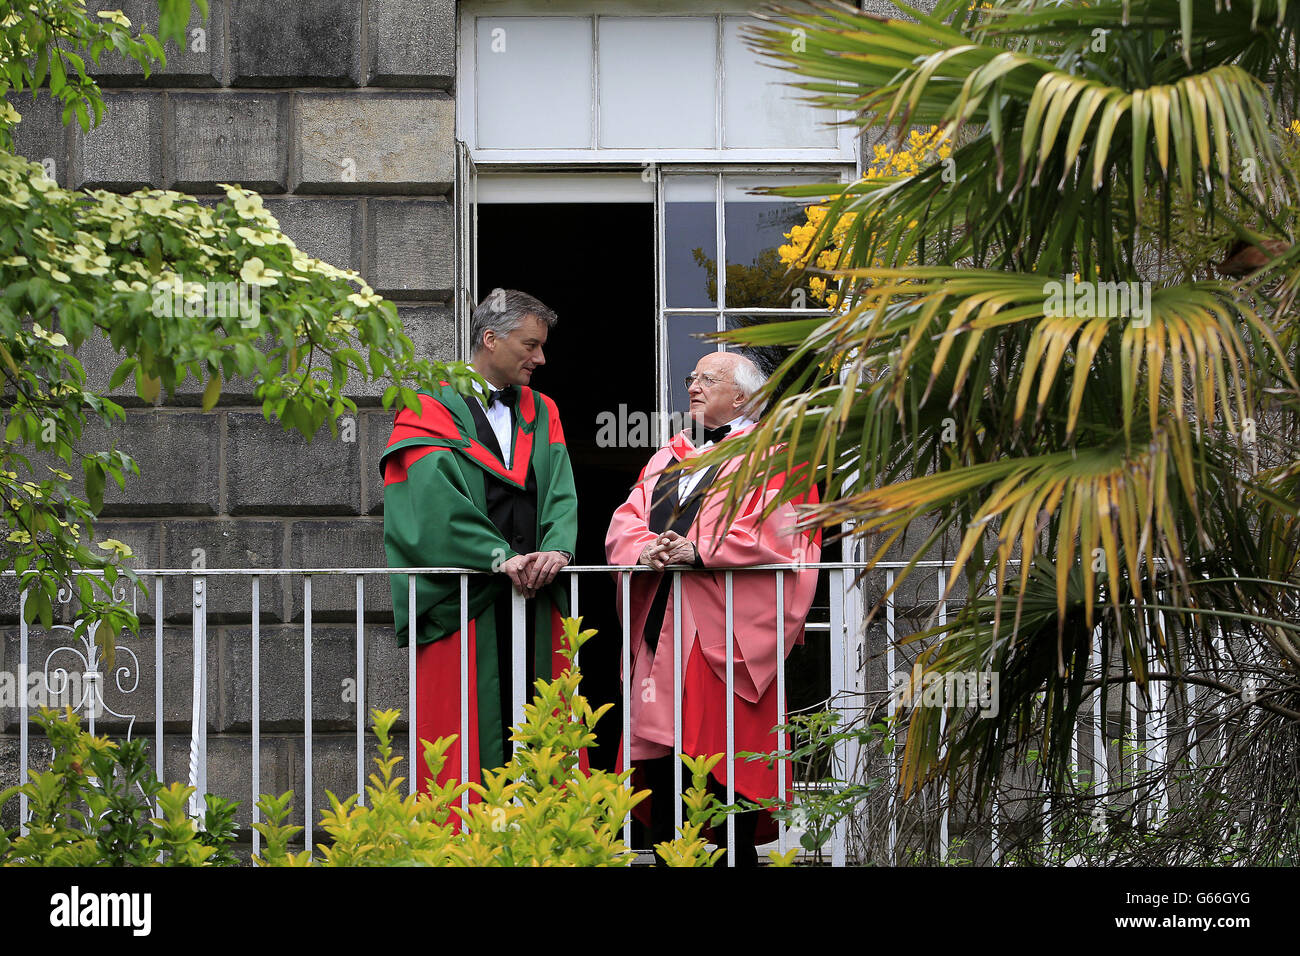 Honorary degrees at Trinity College Stock Photo